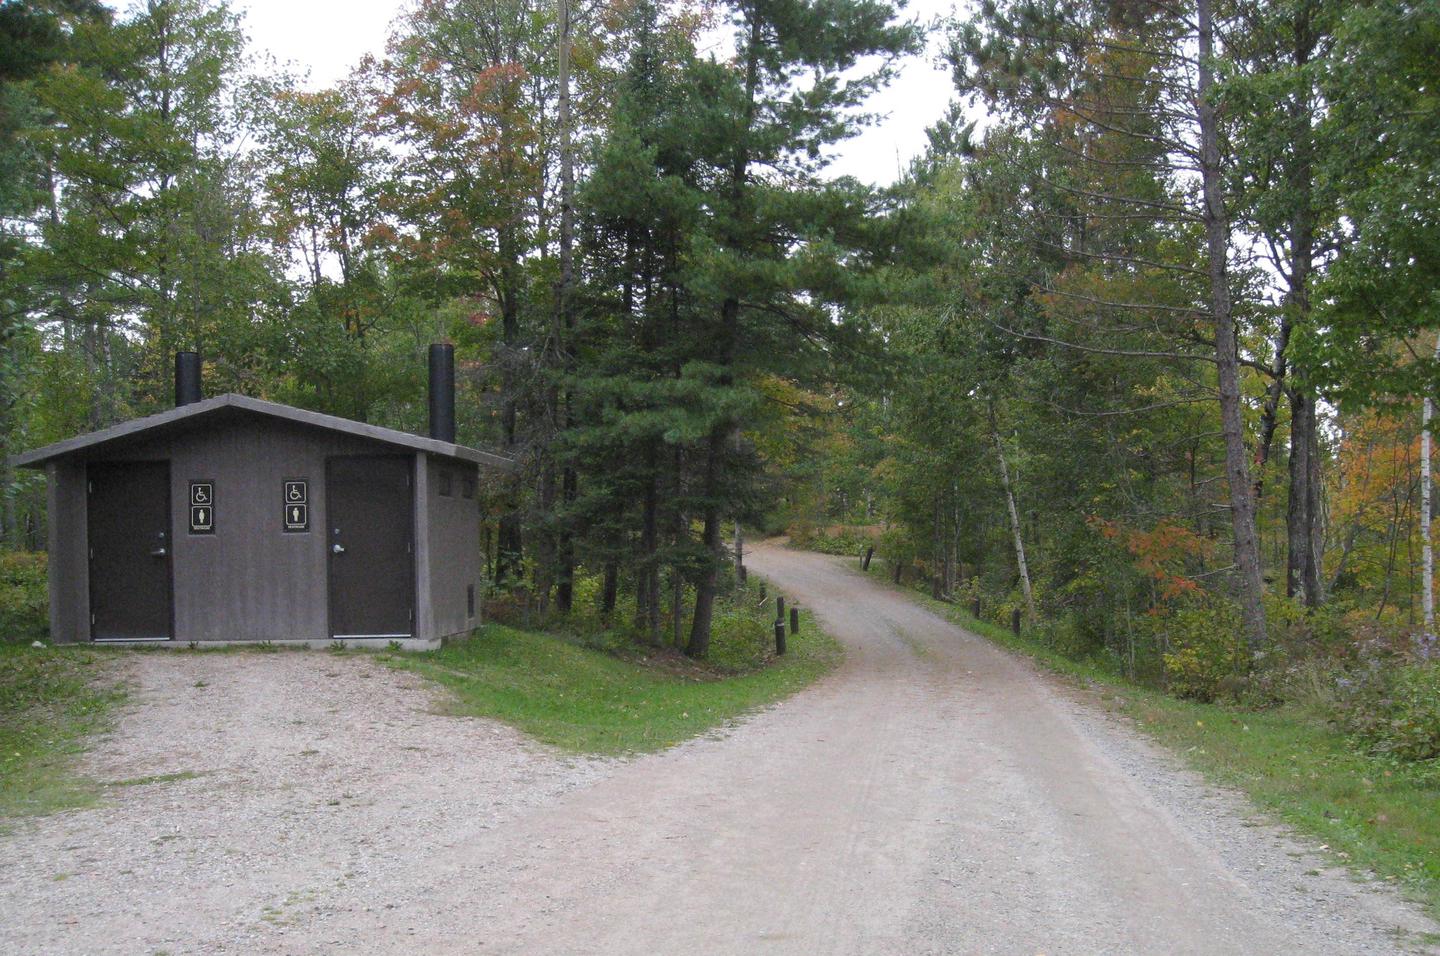 Picture of road and toilet building.View of campground road and bathroom facility, near parking area for hiking trail, beach, and picnic area.